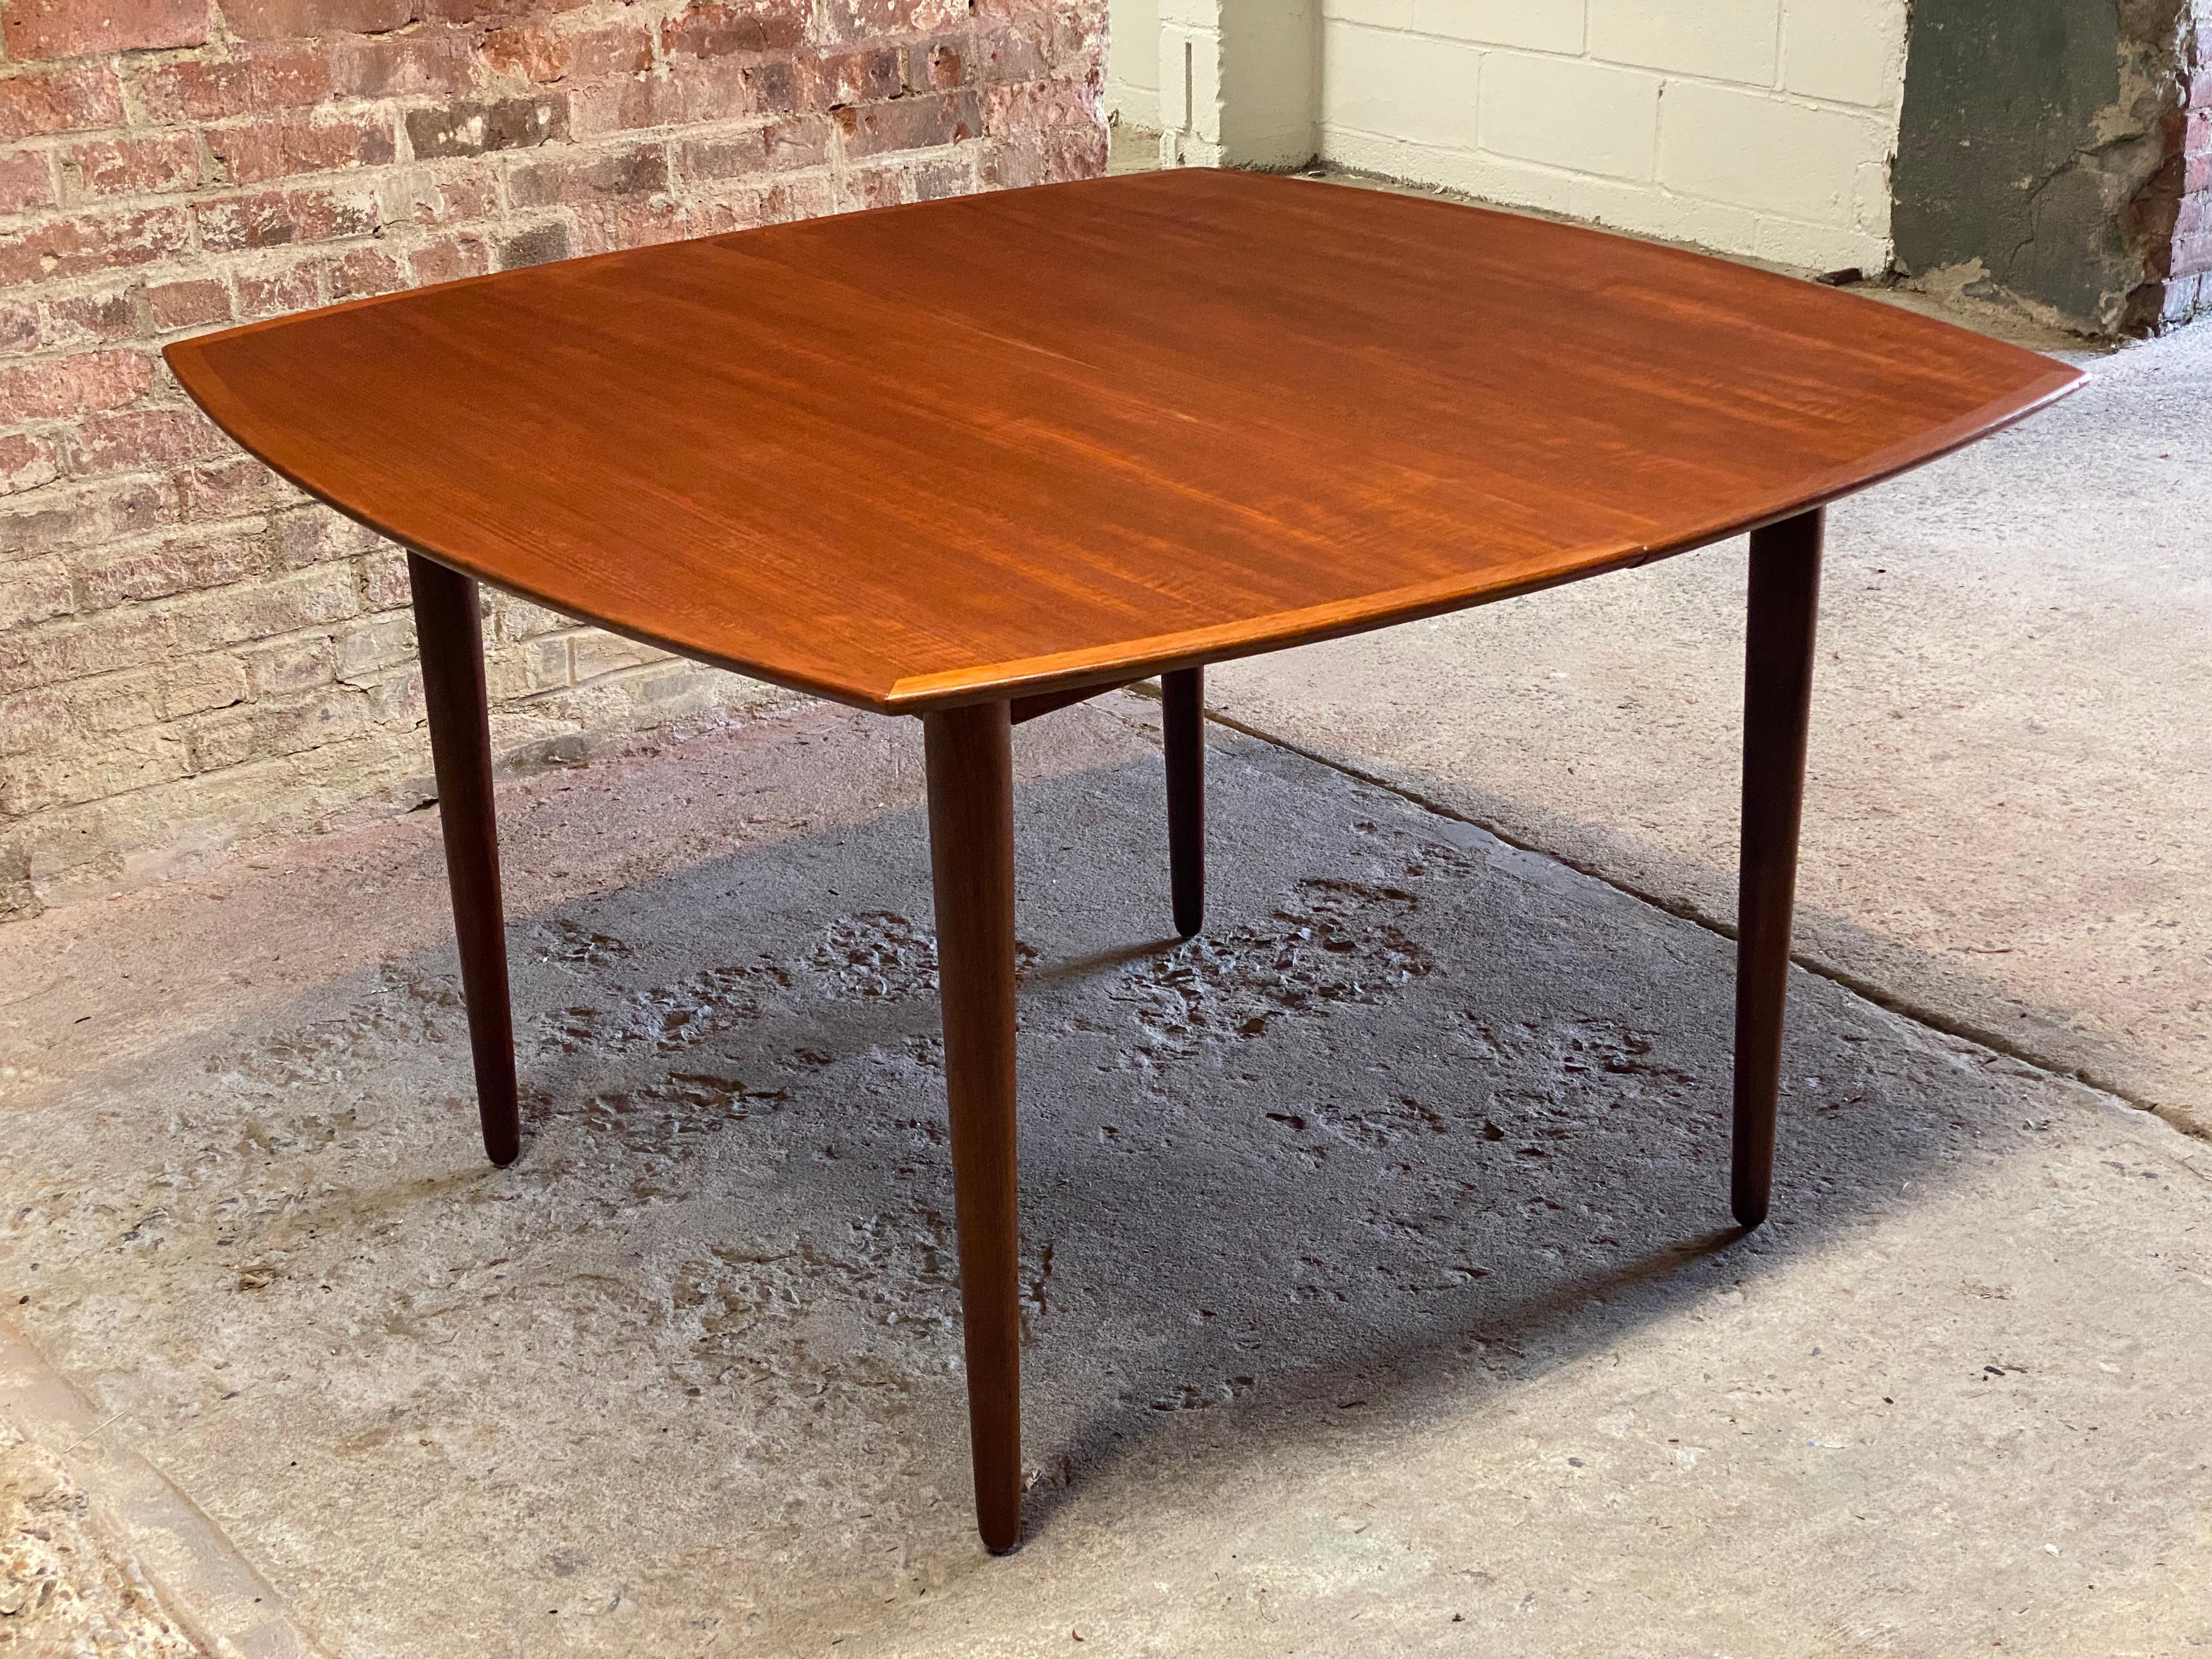 Mid-20th Century Koefoed Hornslet Lis Chairs and Teak Dining Table